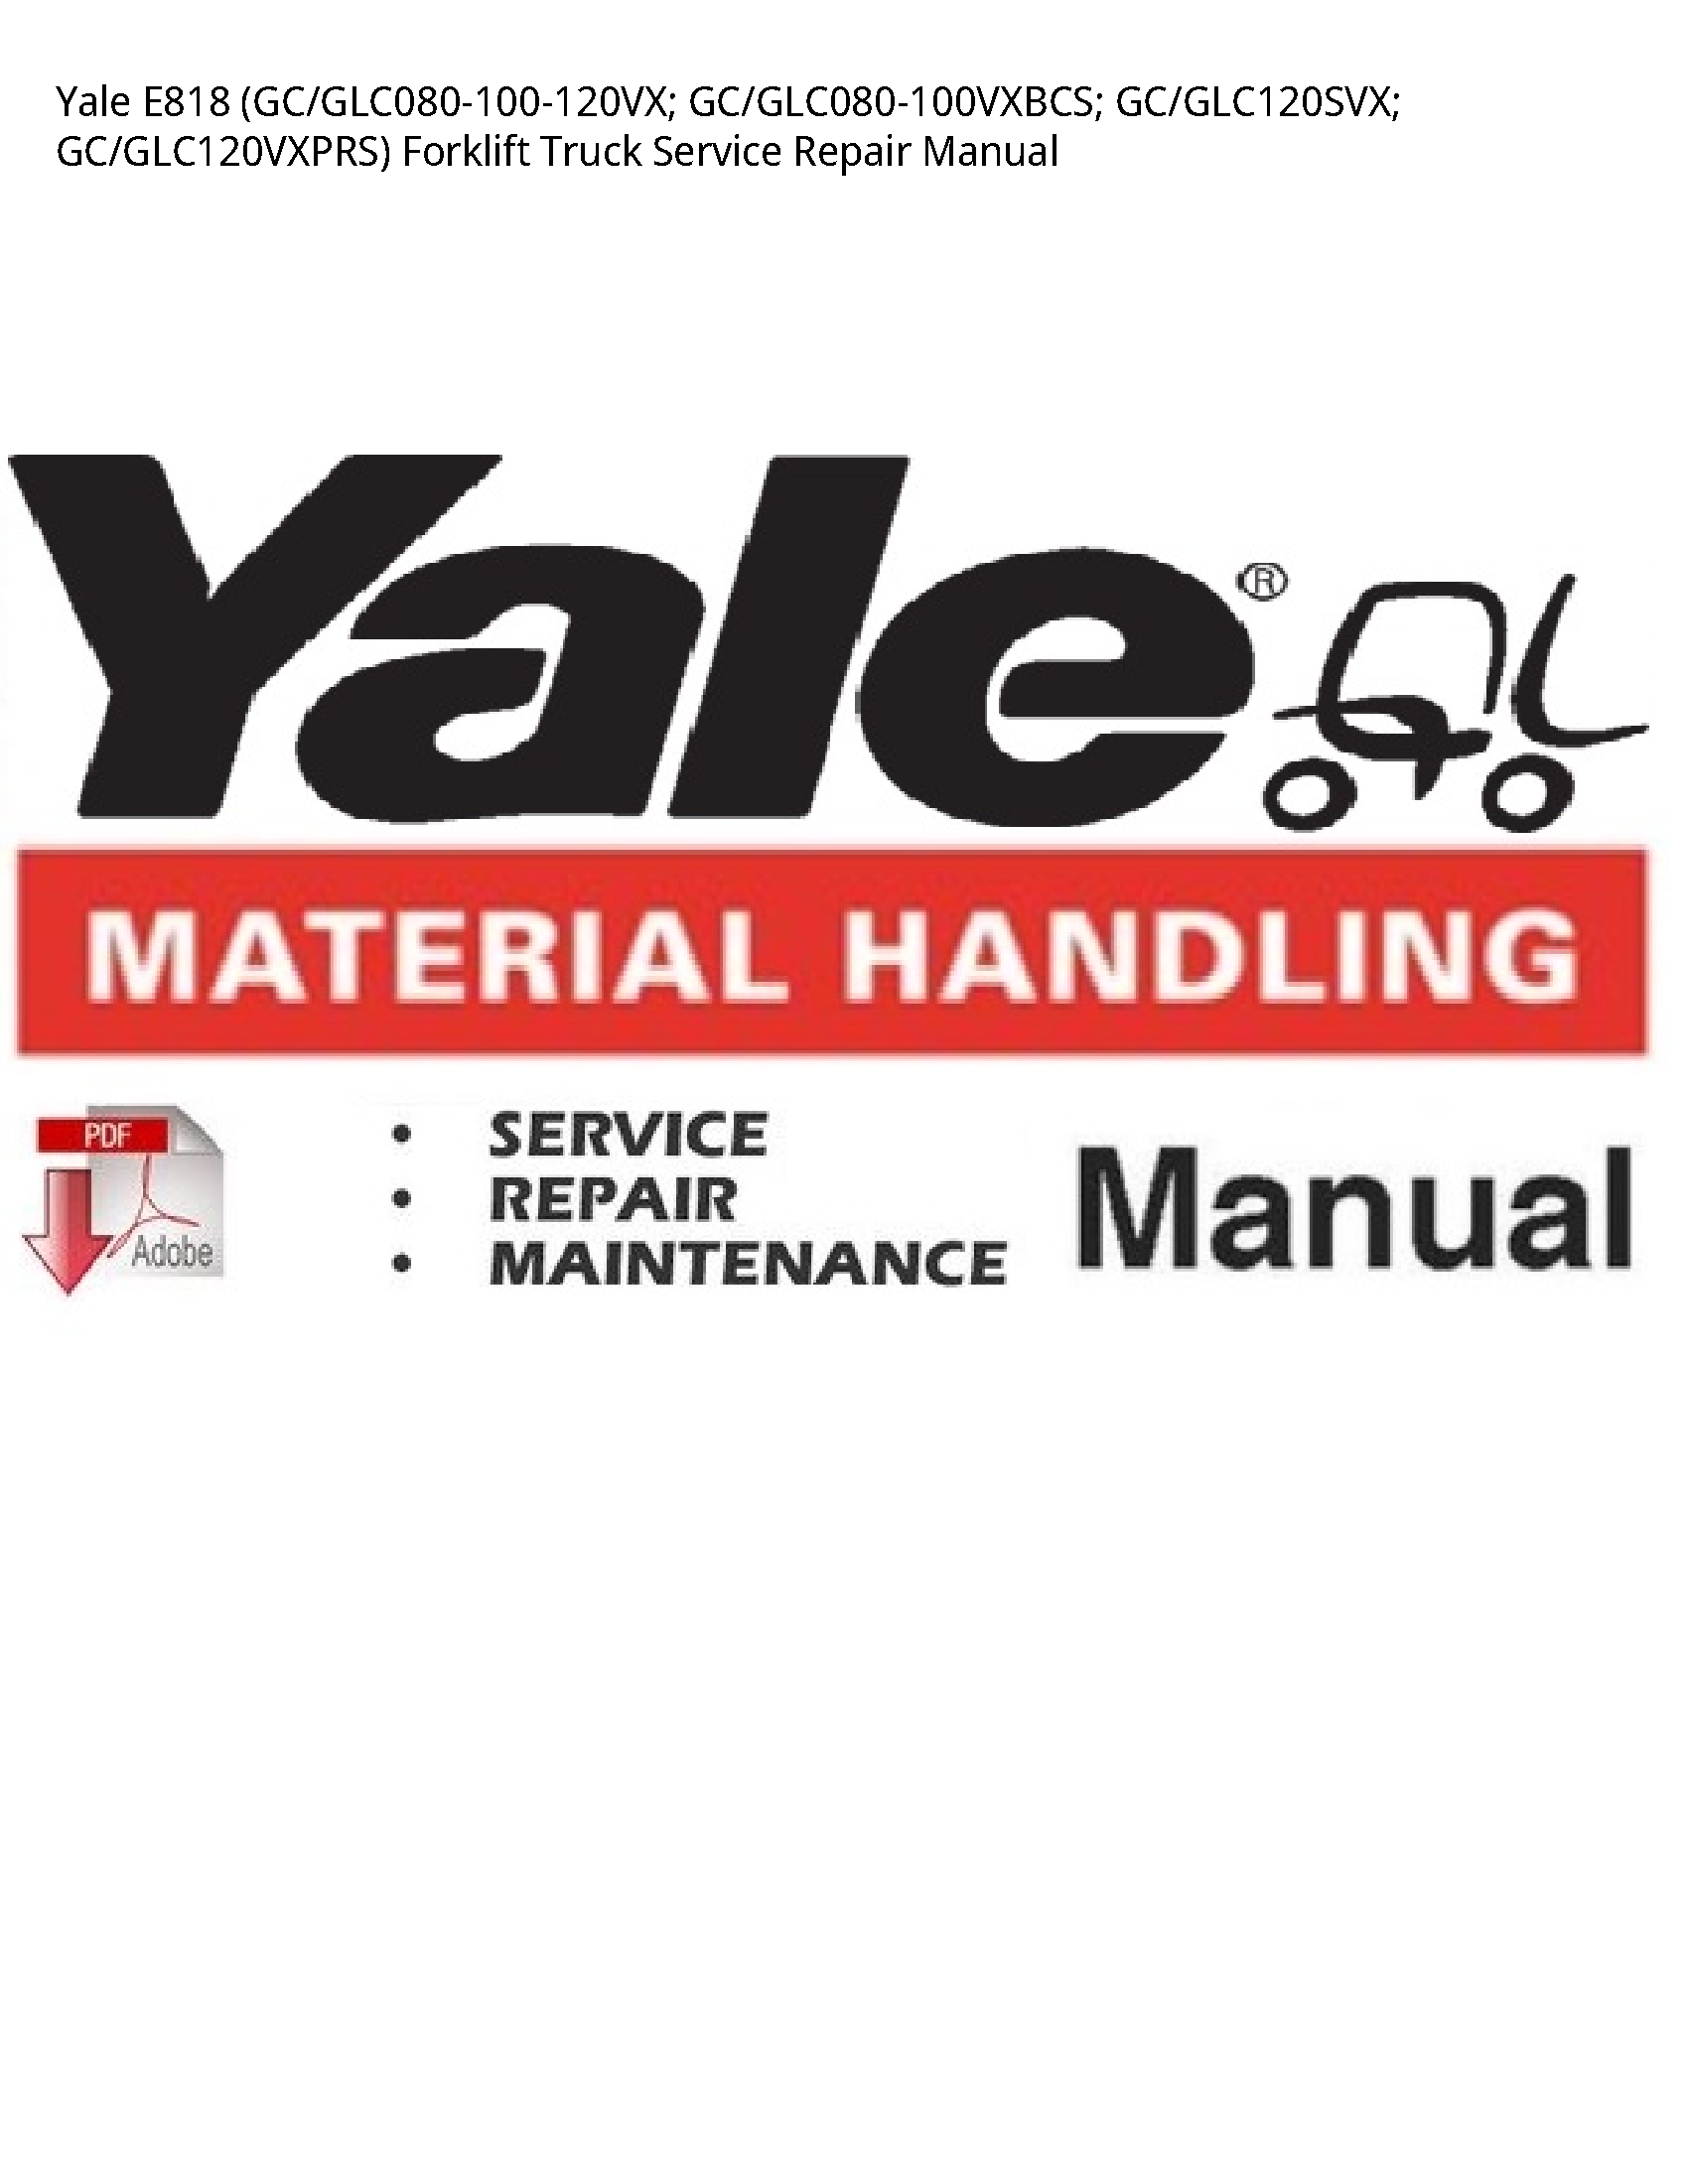 Yale E818 Forklift Truck manual